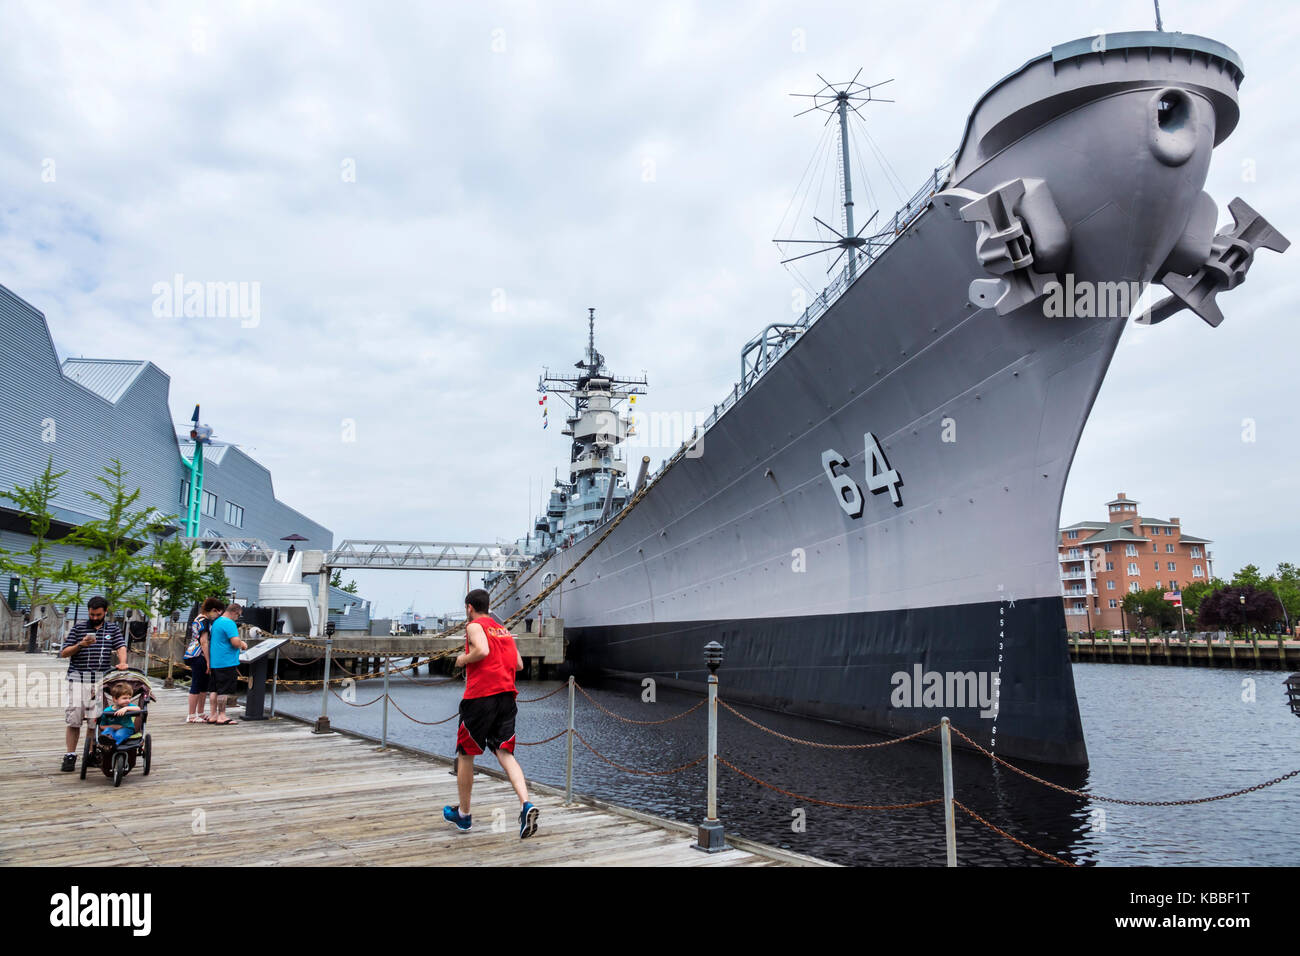 Norfolk Virginia,Elizabeth River water,Downtown,waterfront,Naticus,maritime museum,historic battleship,USS Wisconsin BB-64,anchors,front,bow,visitors Stock Photo